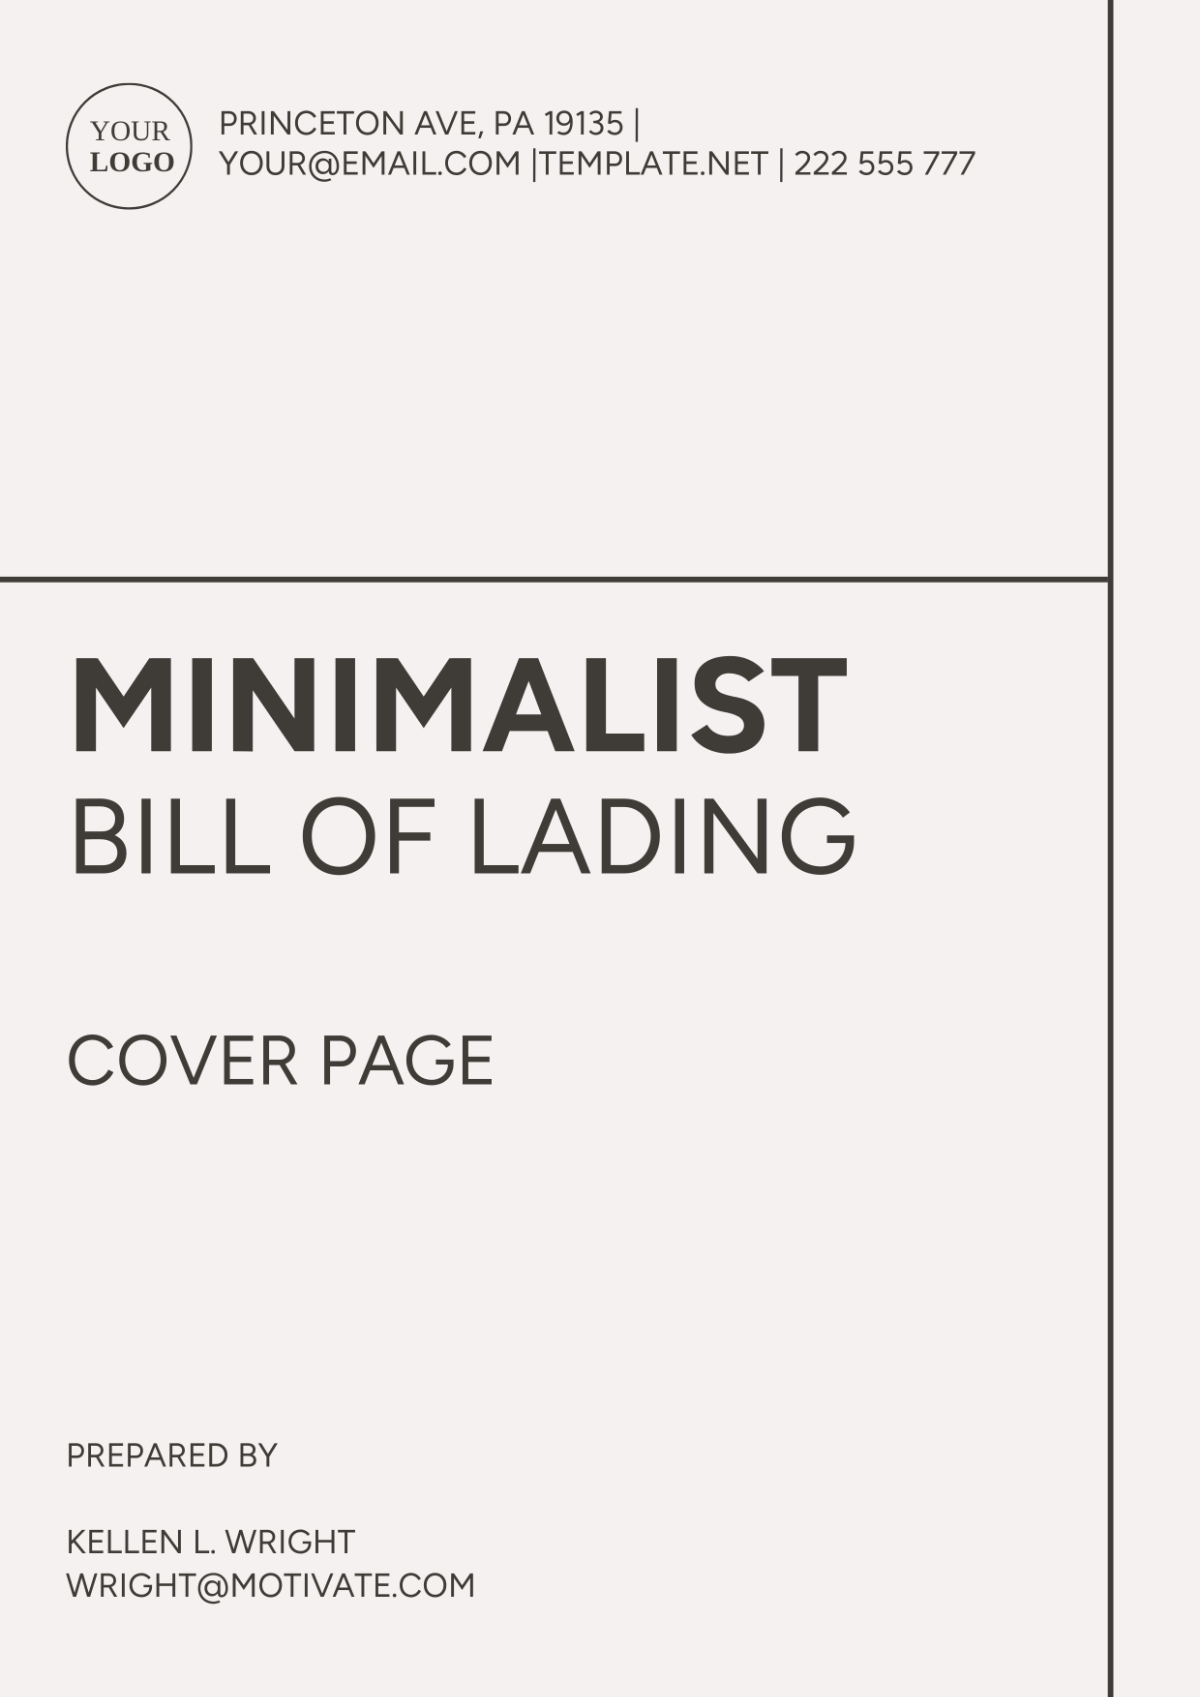 Minimalist Bill of Lading Cover Page Template